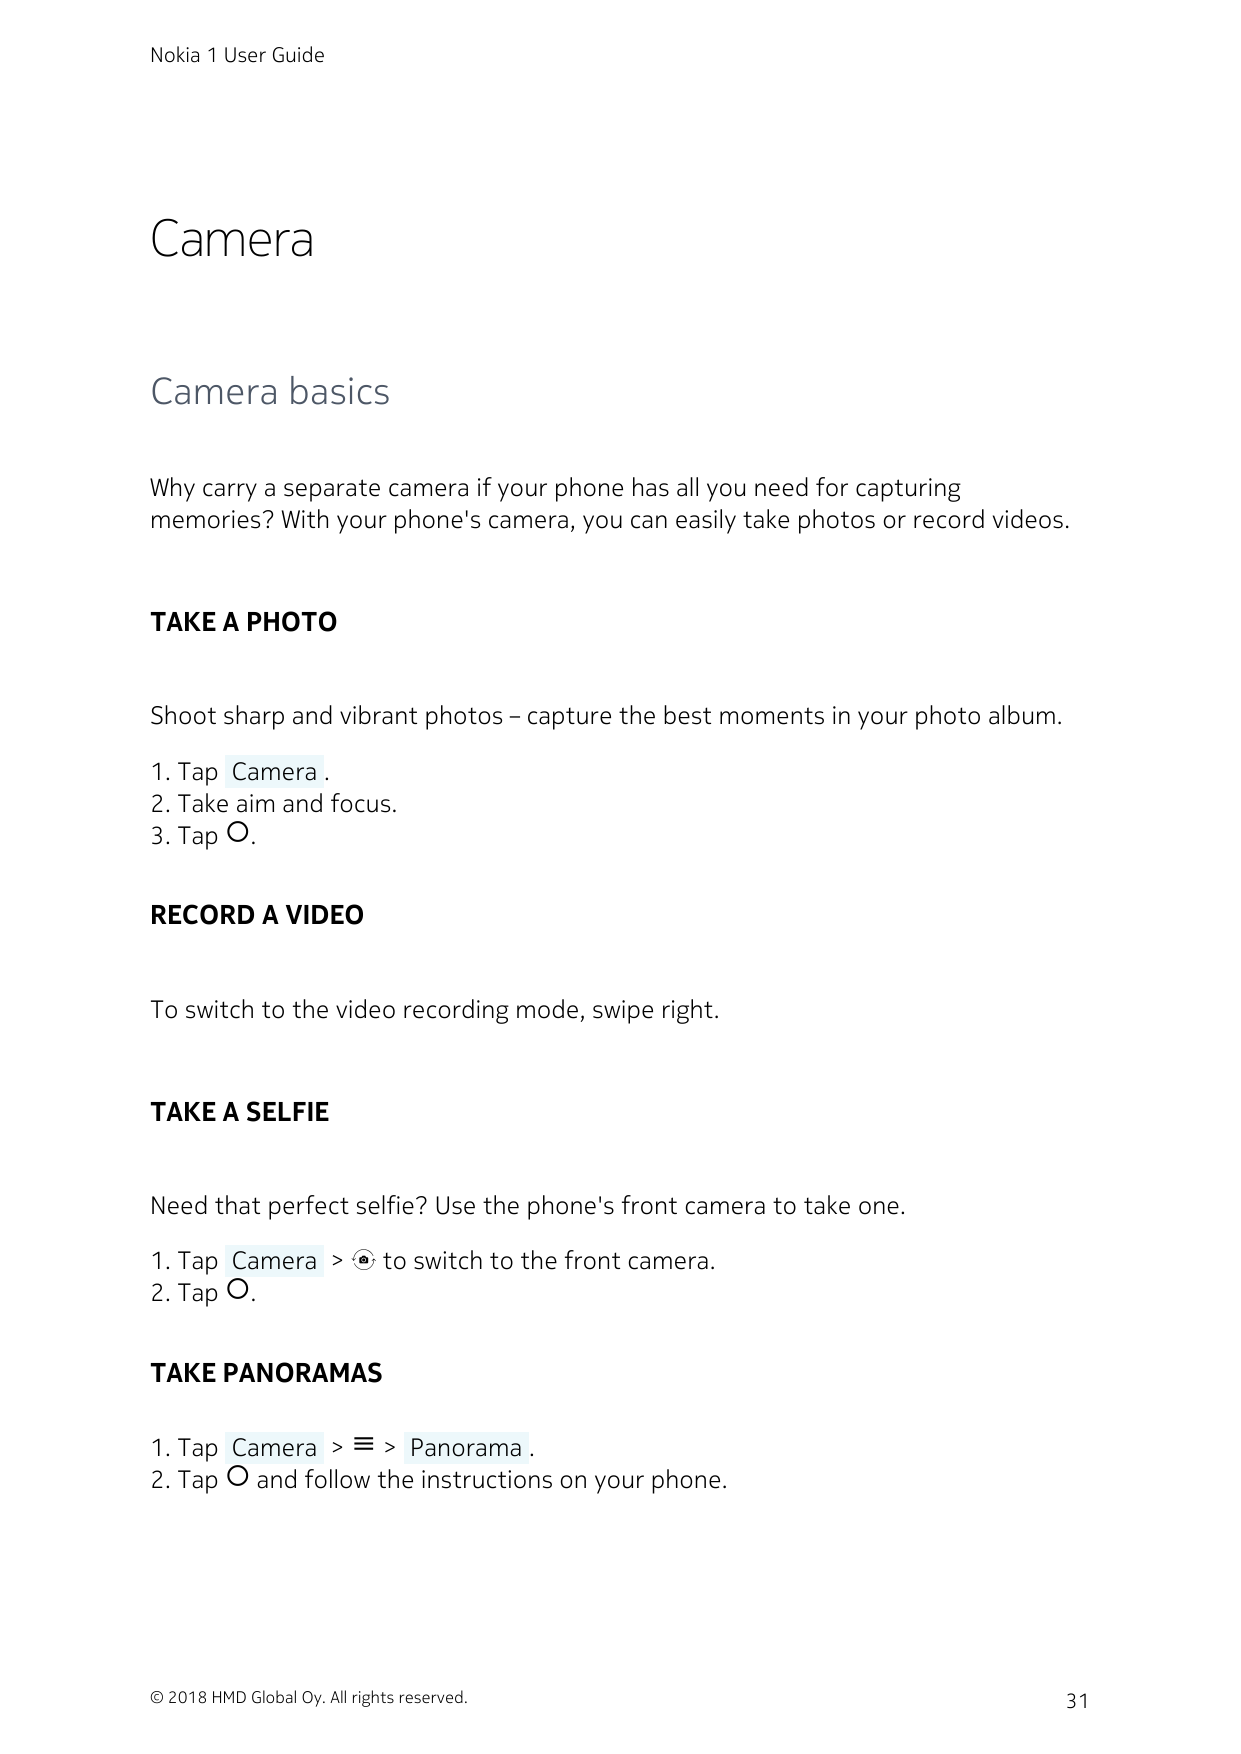 Nokia 1 User GuideCameraCamera basicsWhy carry a separate camera if your phone has all you need for capturingmemories? With your